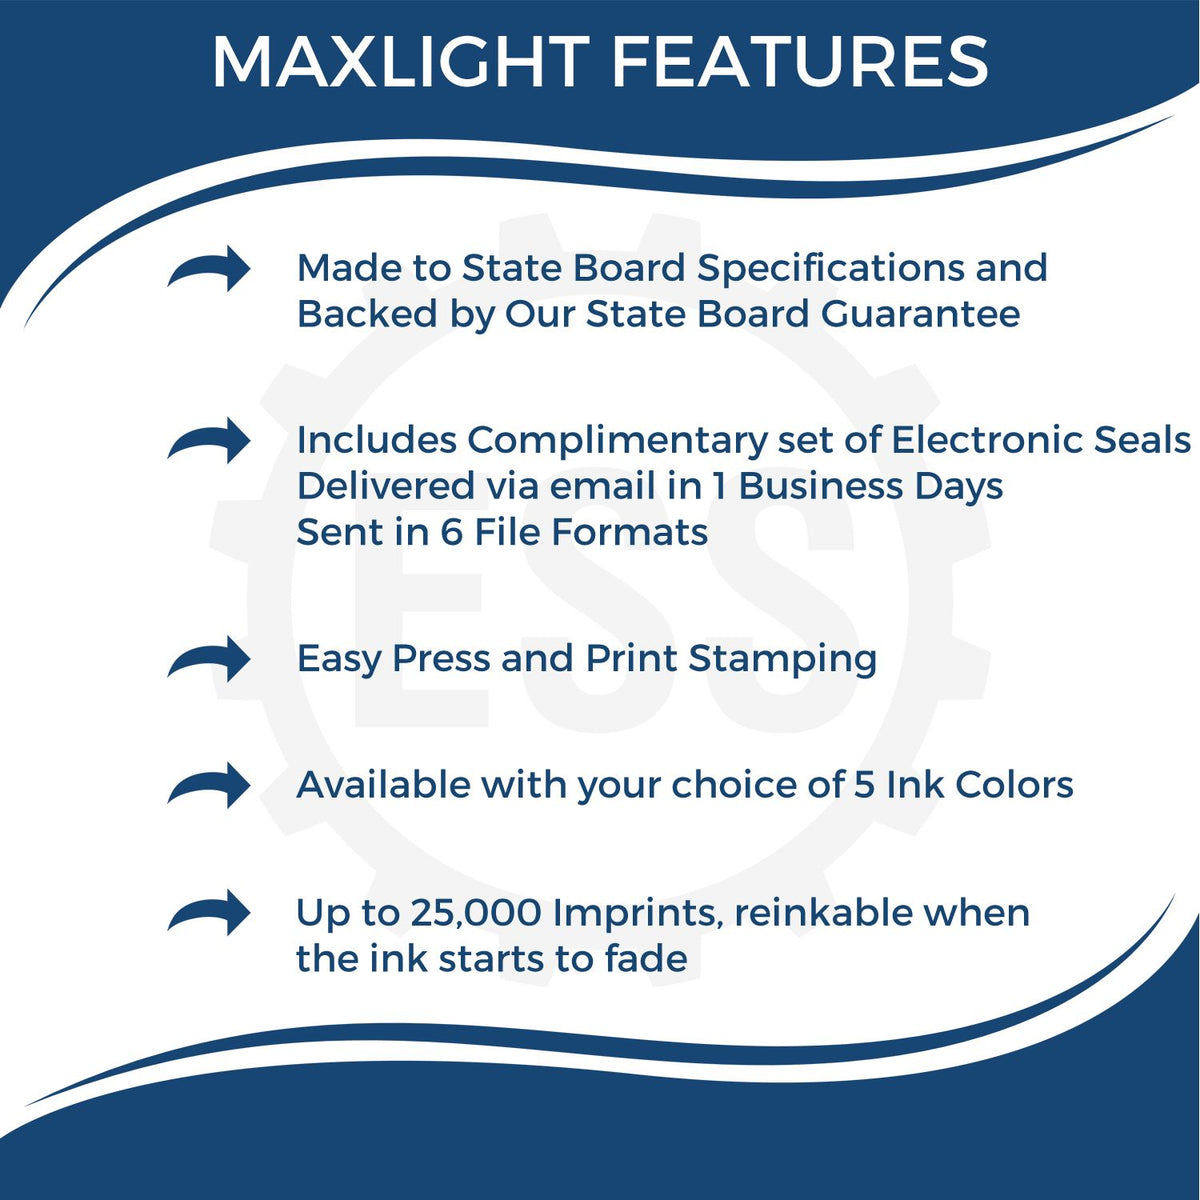 A picture of an infographic highlighting the selling points for the Premium MaxLight Pre-Inked Mississippi Geology Stamp